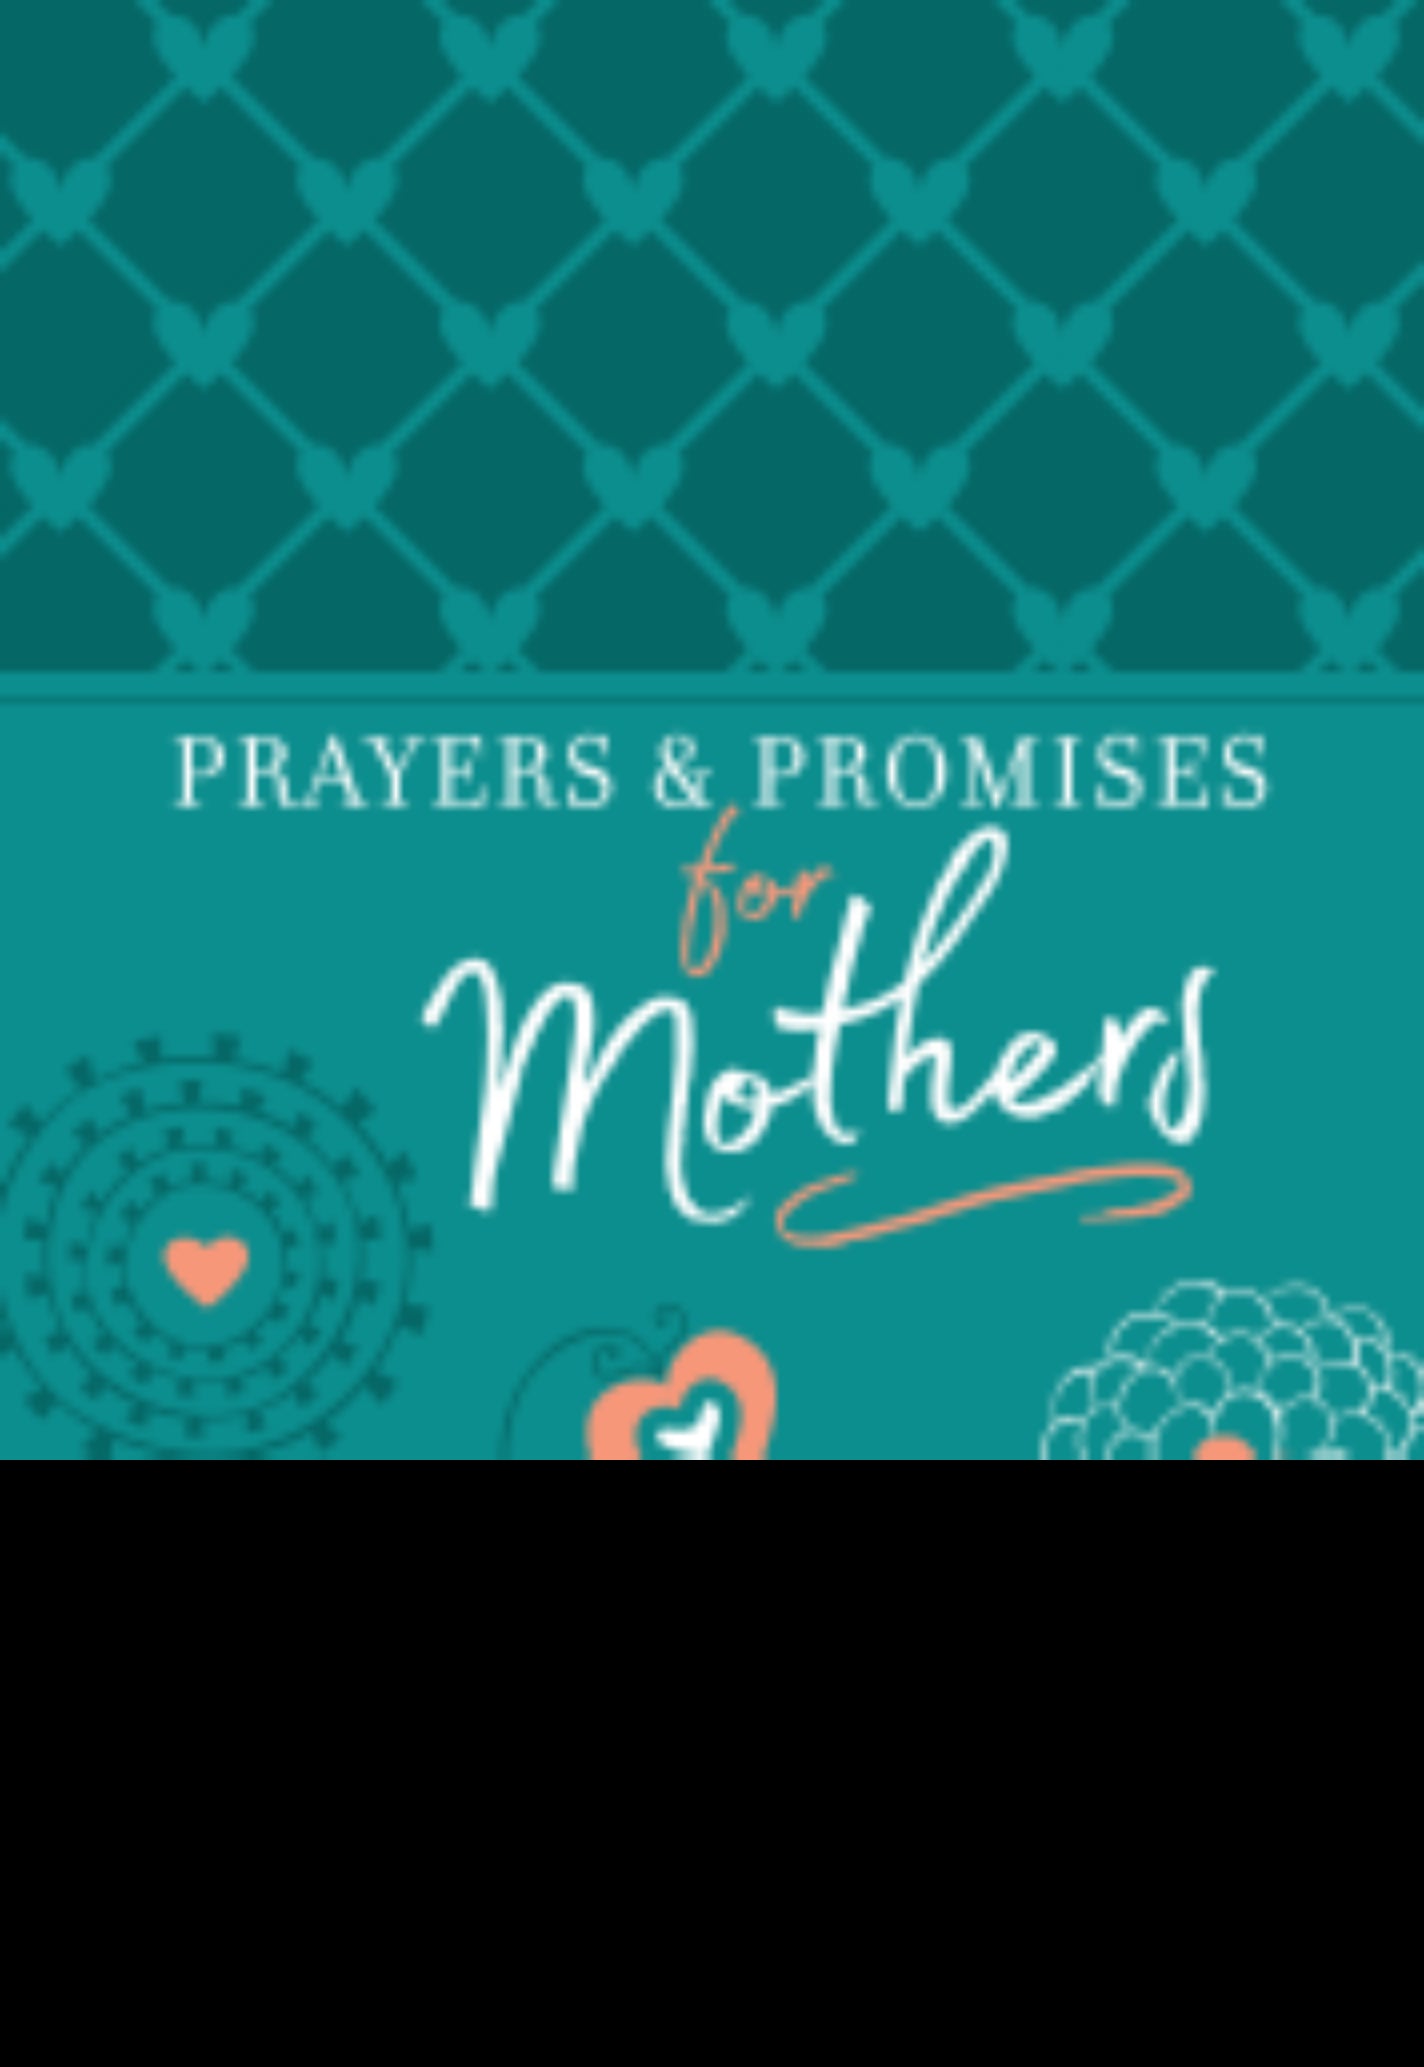 Image of Prayers and Promises for Mothers other